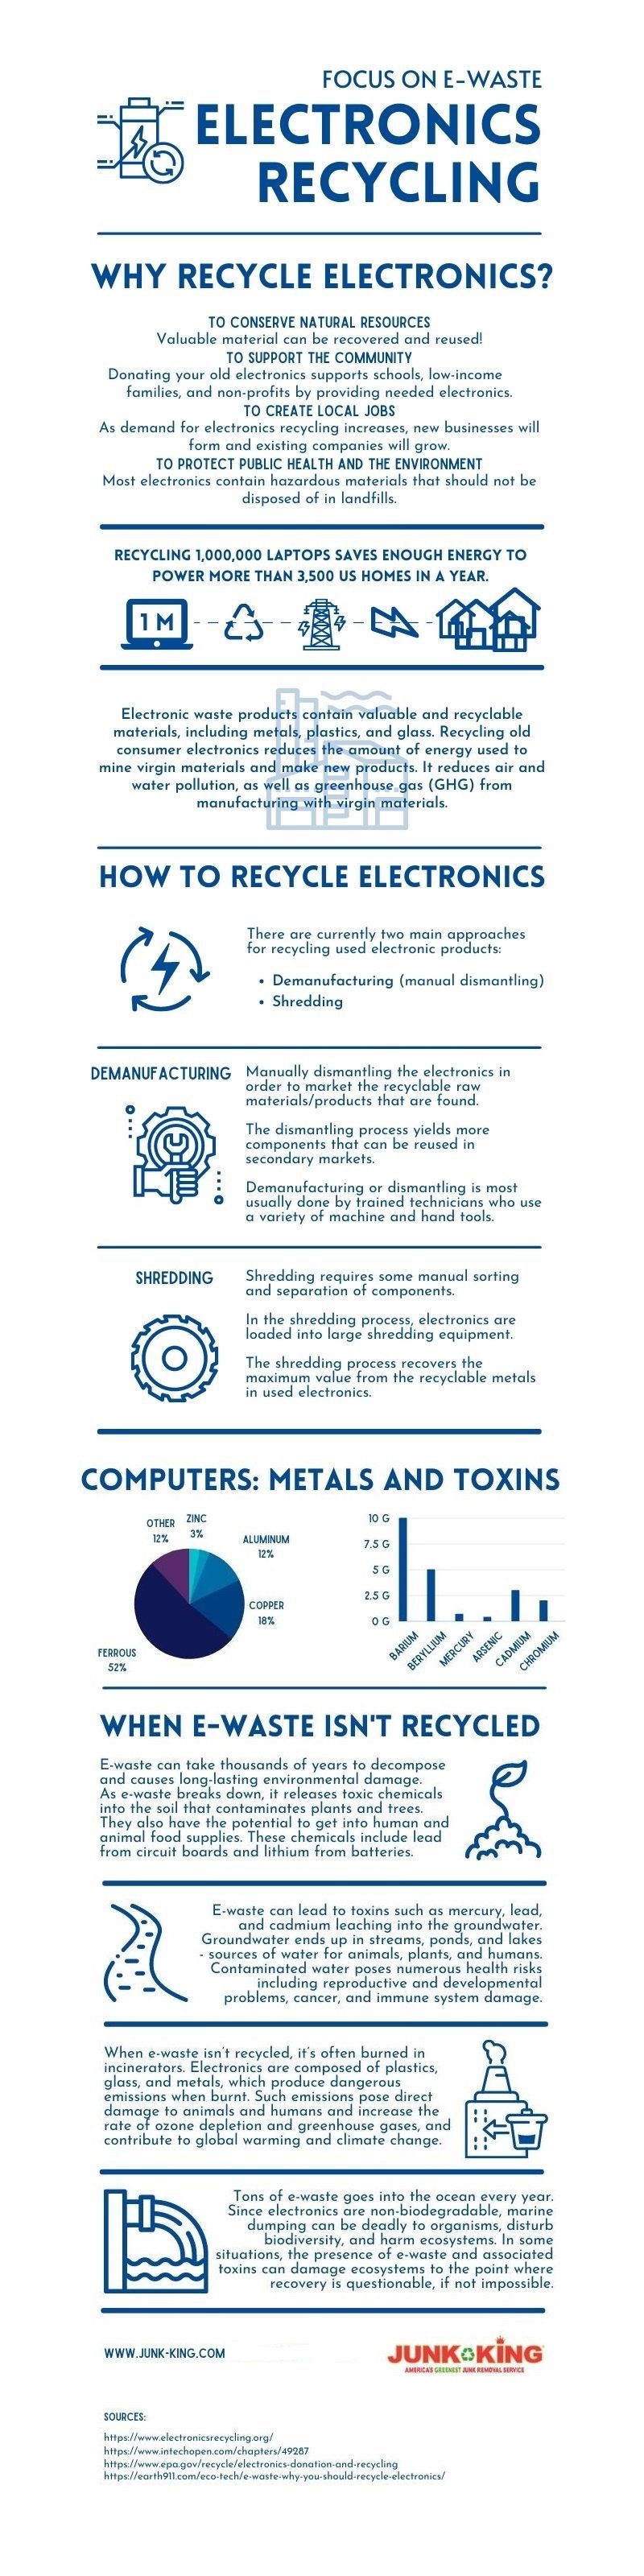 electronics recycling Infographic